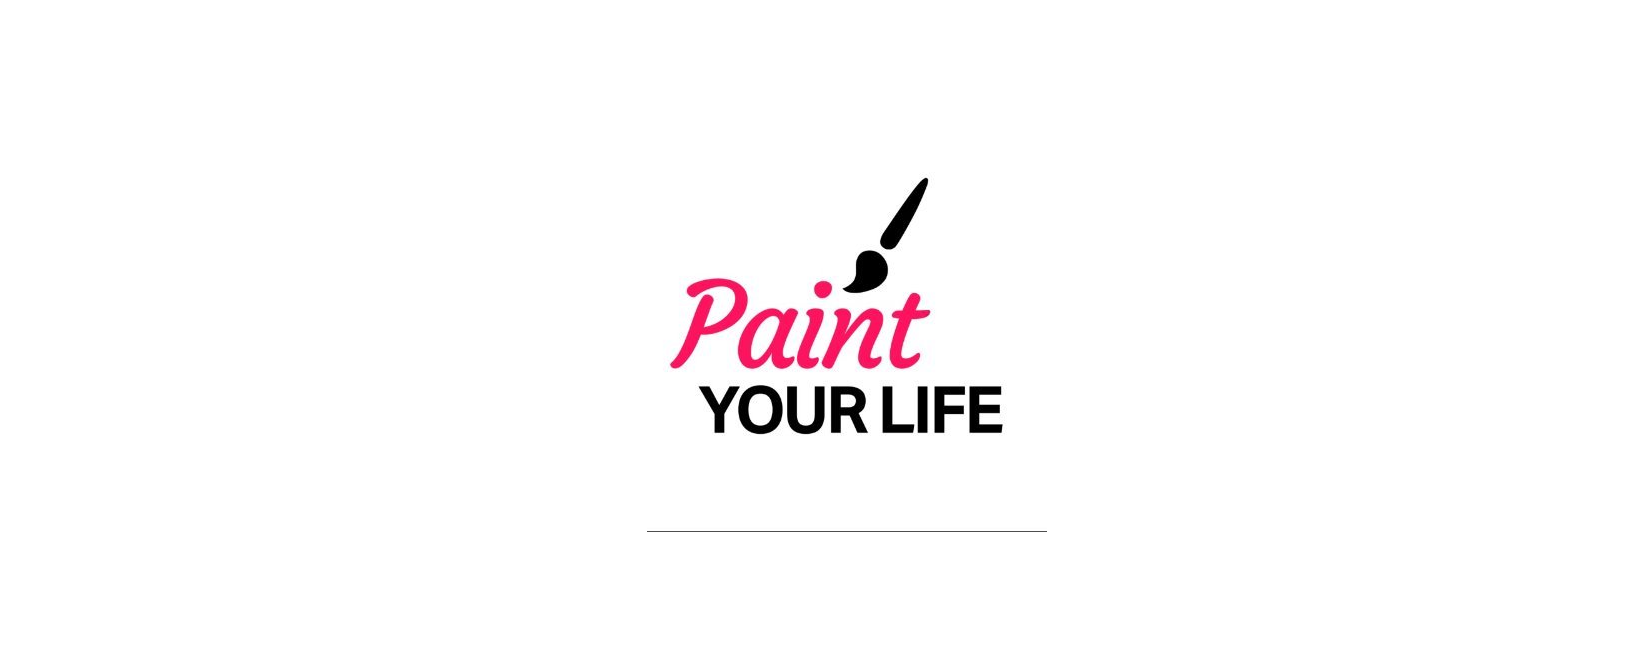 Paint Your Life Discount Code 2022